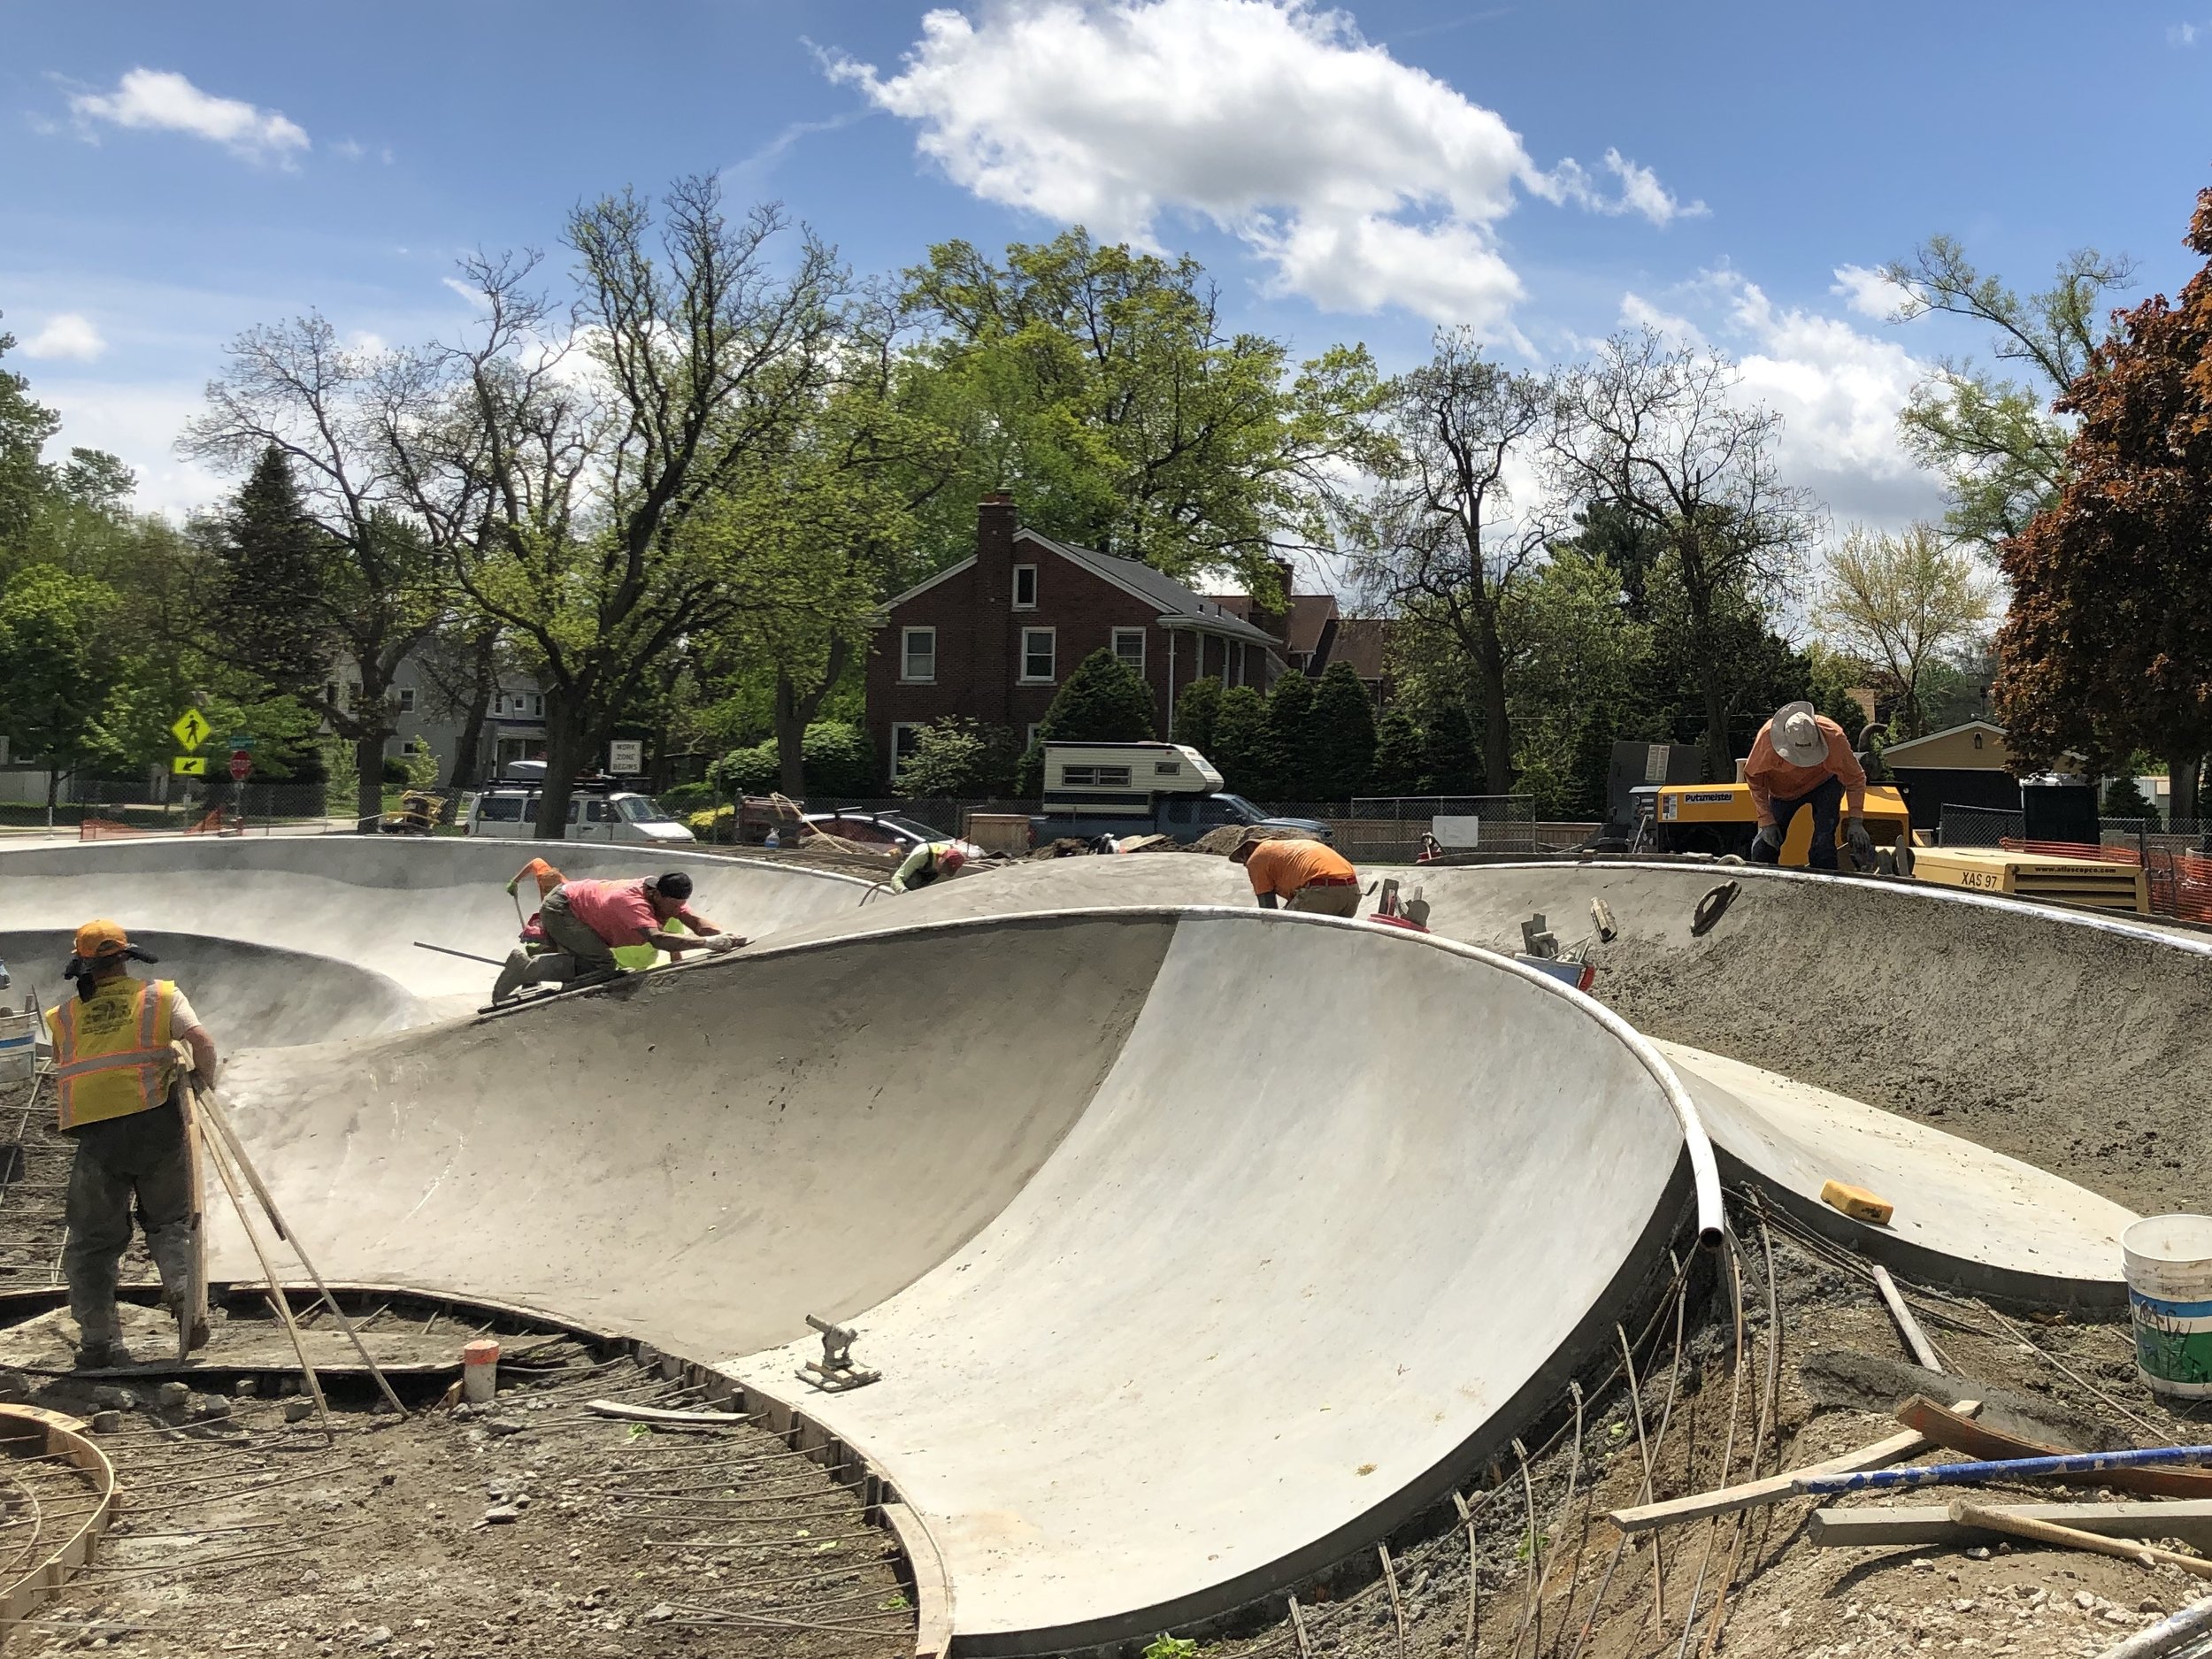 Did you know there is a skatepark renaissance going on in Michigan? 💪🏽💯We’ve built 6 parks there over the last few years making it one of the Midwest’s best #skateboarding destinations 😀